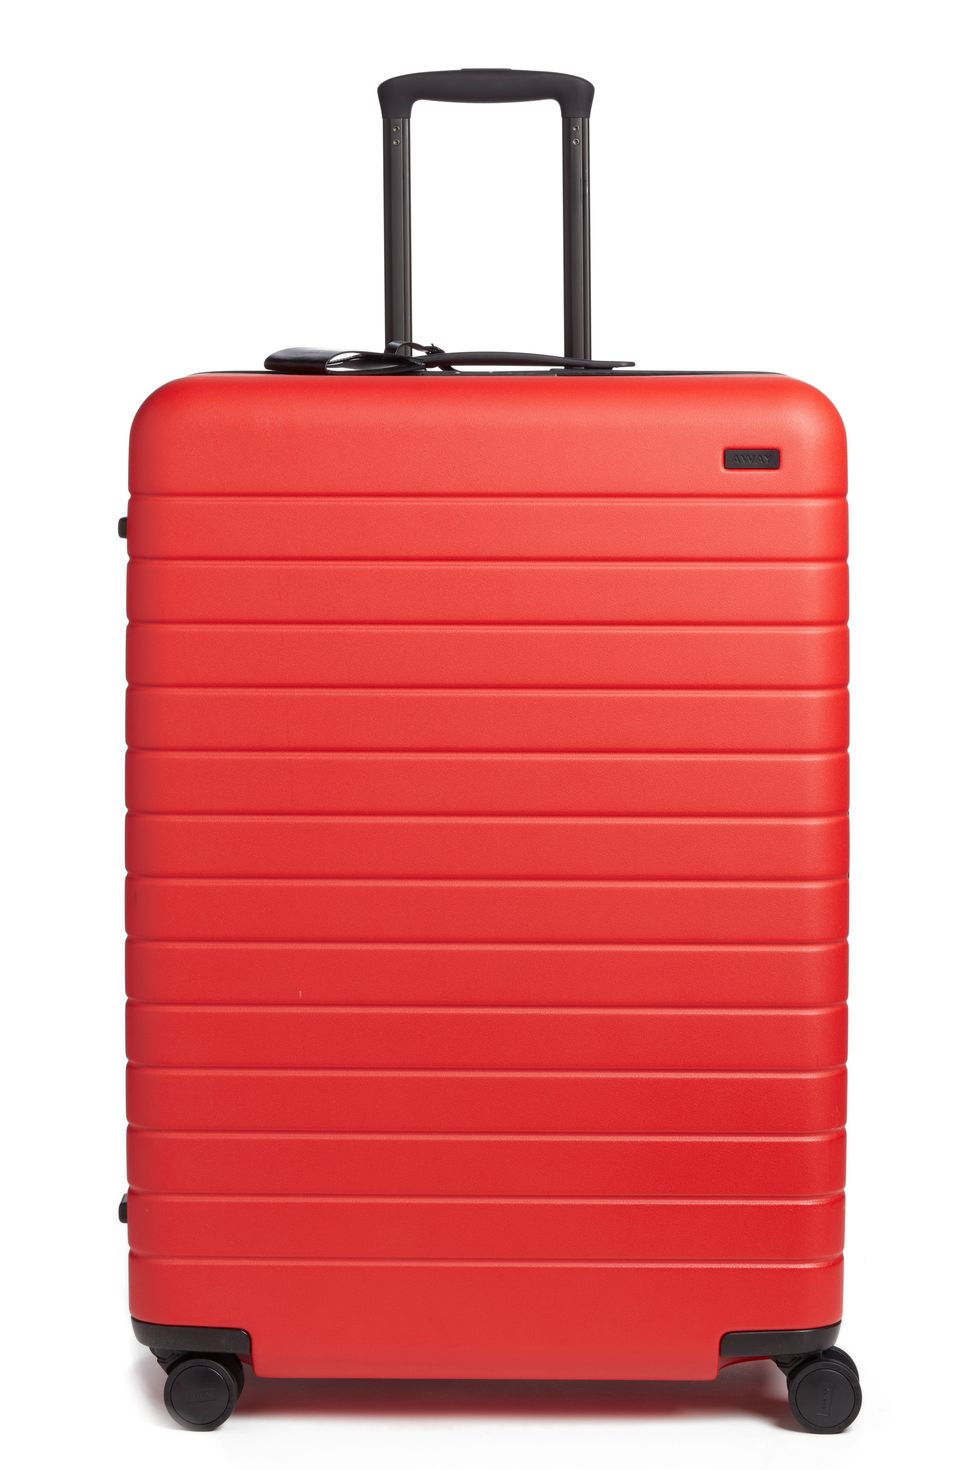 The Large Hard Shell Suitcase in Red